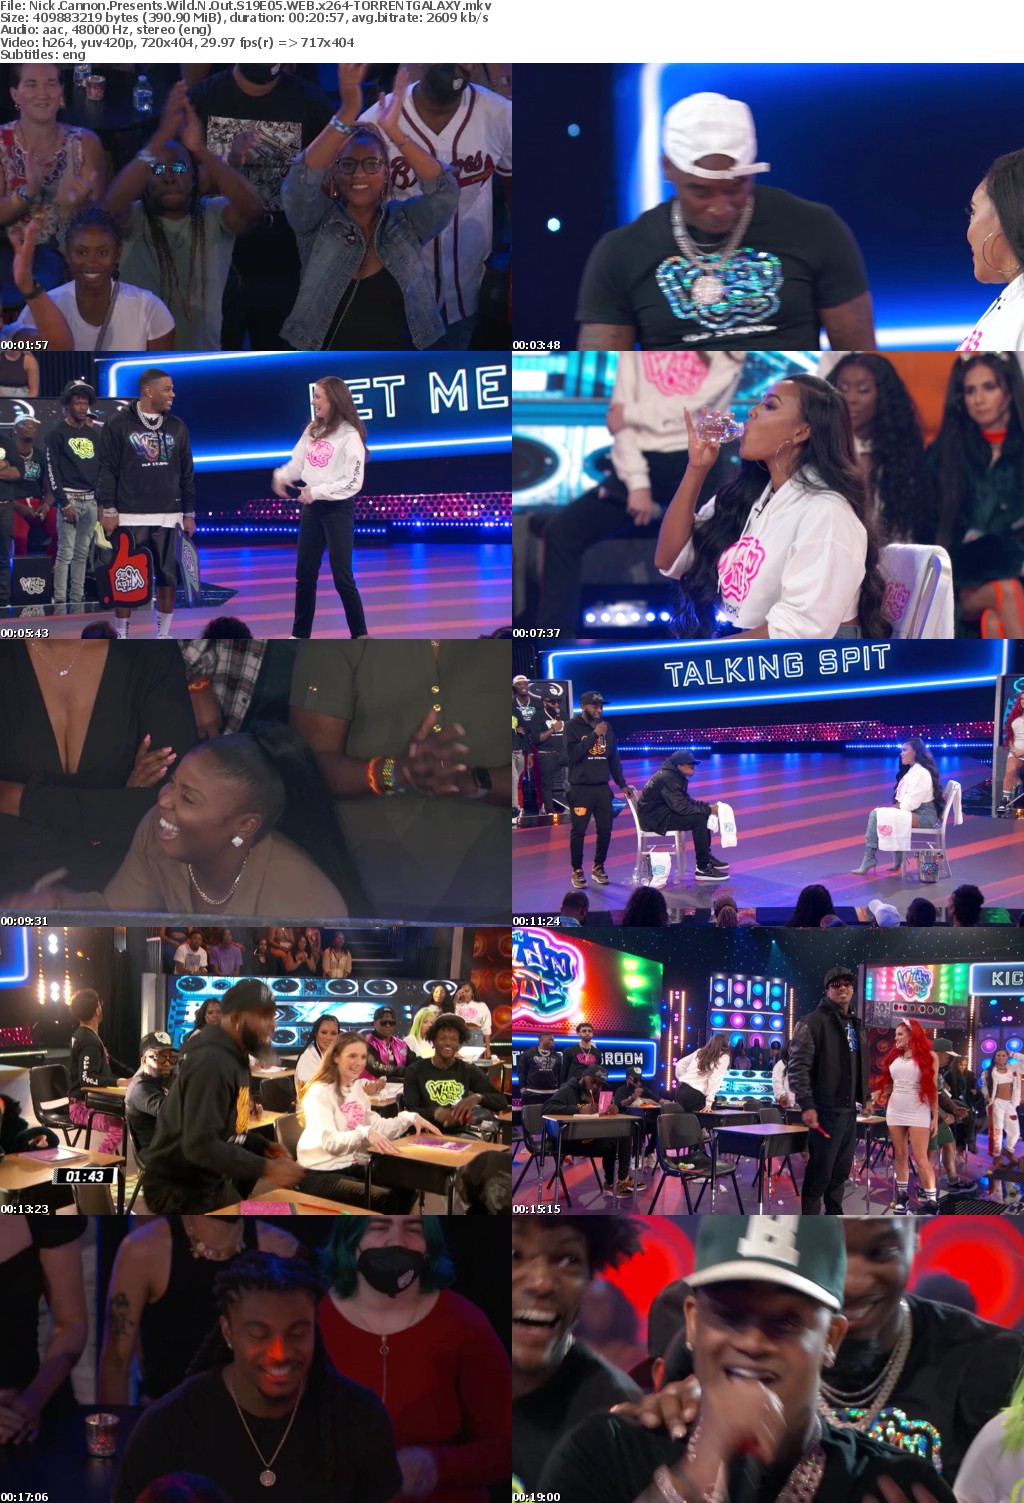 Nick Cannon Presents Wild N Out S19E05 WEB x264-GALAXY